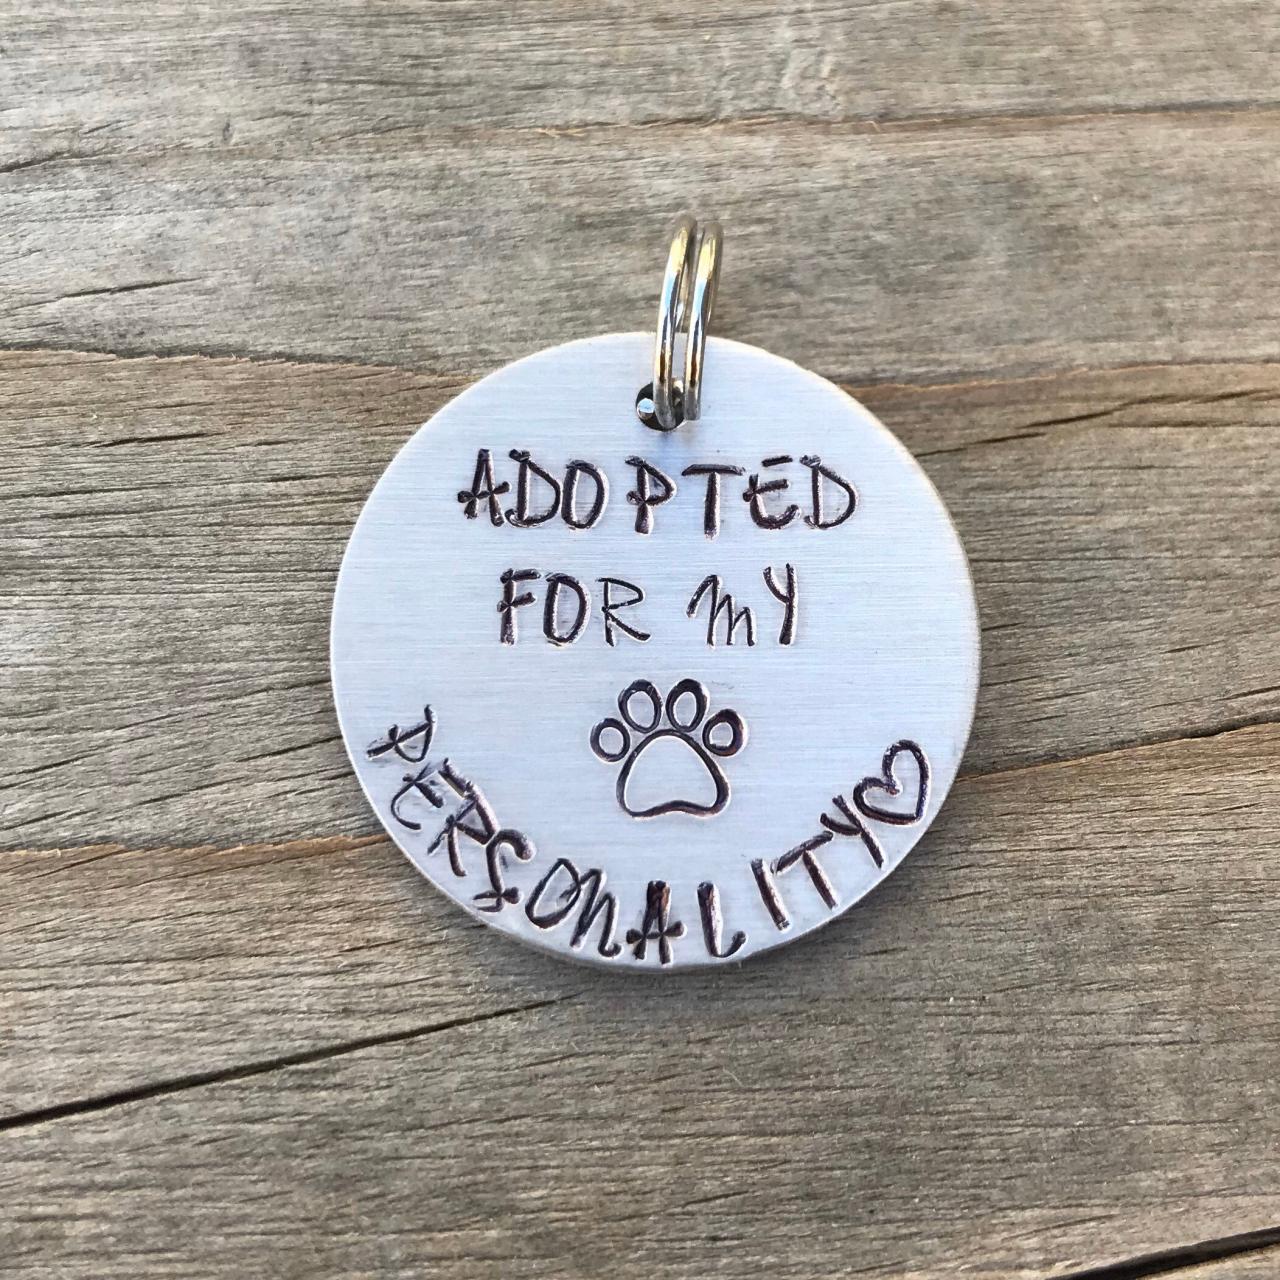 Adopted for my personality Pet Tag, fun pet tag, positive, paws, punny, tag, custom